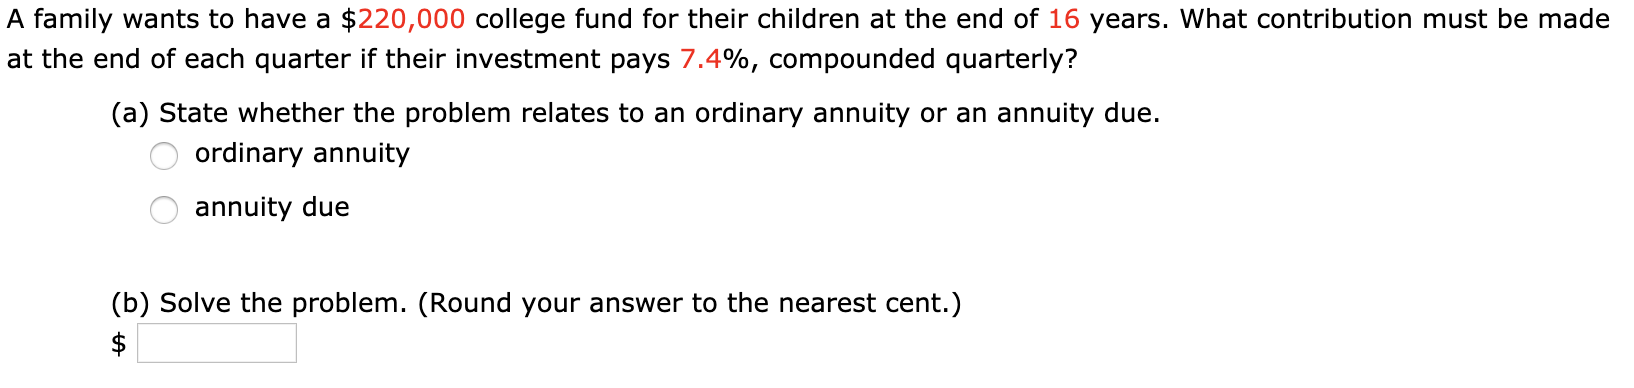 A family wants to have a $220,000 college fund for their children at the end of 16 years. What contribution must be made
at the end of each quarter if their investment pays 7.4%, compounded quarterly?
(a) State whether the problem relates to an ordinary annuity or an annuity due.
ordinary annuity
annuity due
(b) Solve the problem. (Round your answer to the nearest cent.)
